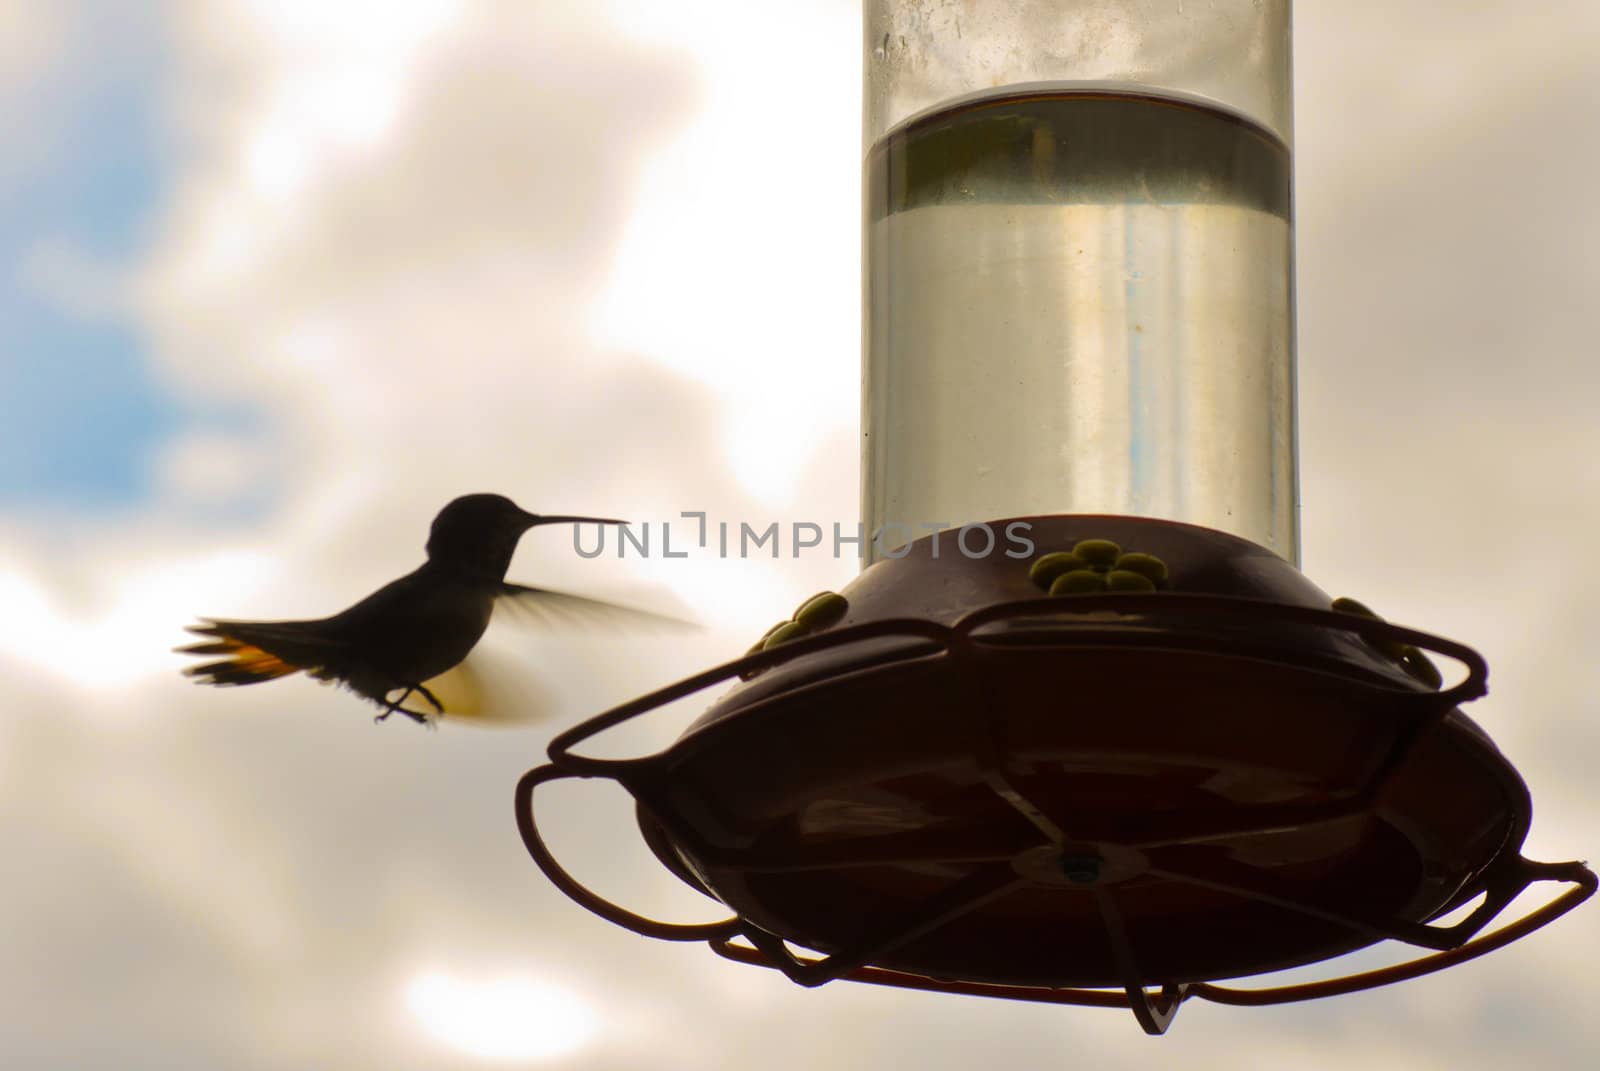 Hummingbird Approaches Feeder by RefocusPhoto